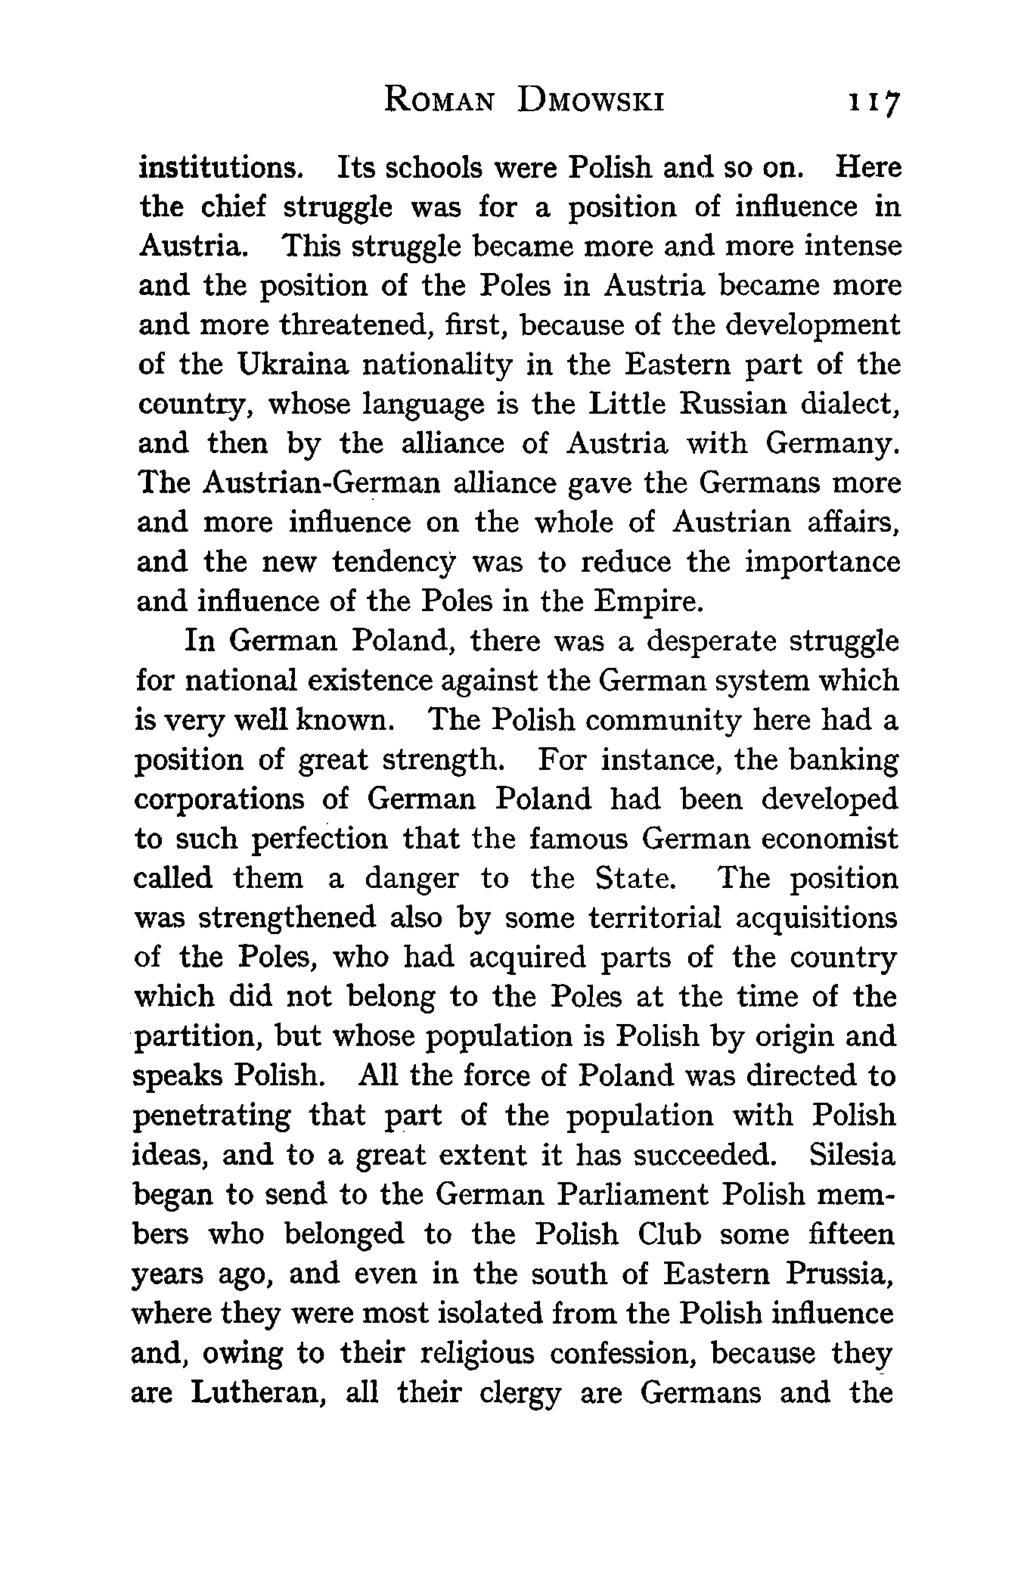 ROMAN DMOWSKI 117 institutions. Its schools were Polish and so on. Here the chief struggle was for a position of influence in Austria.